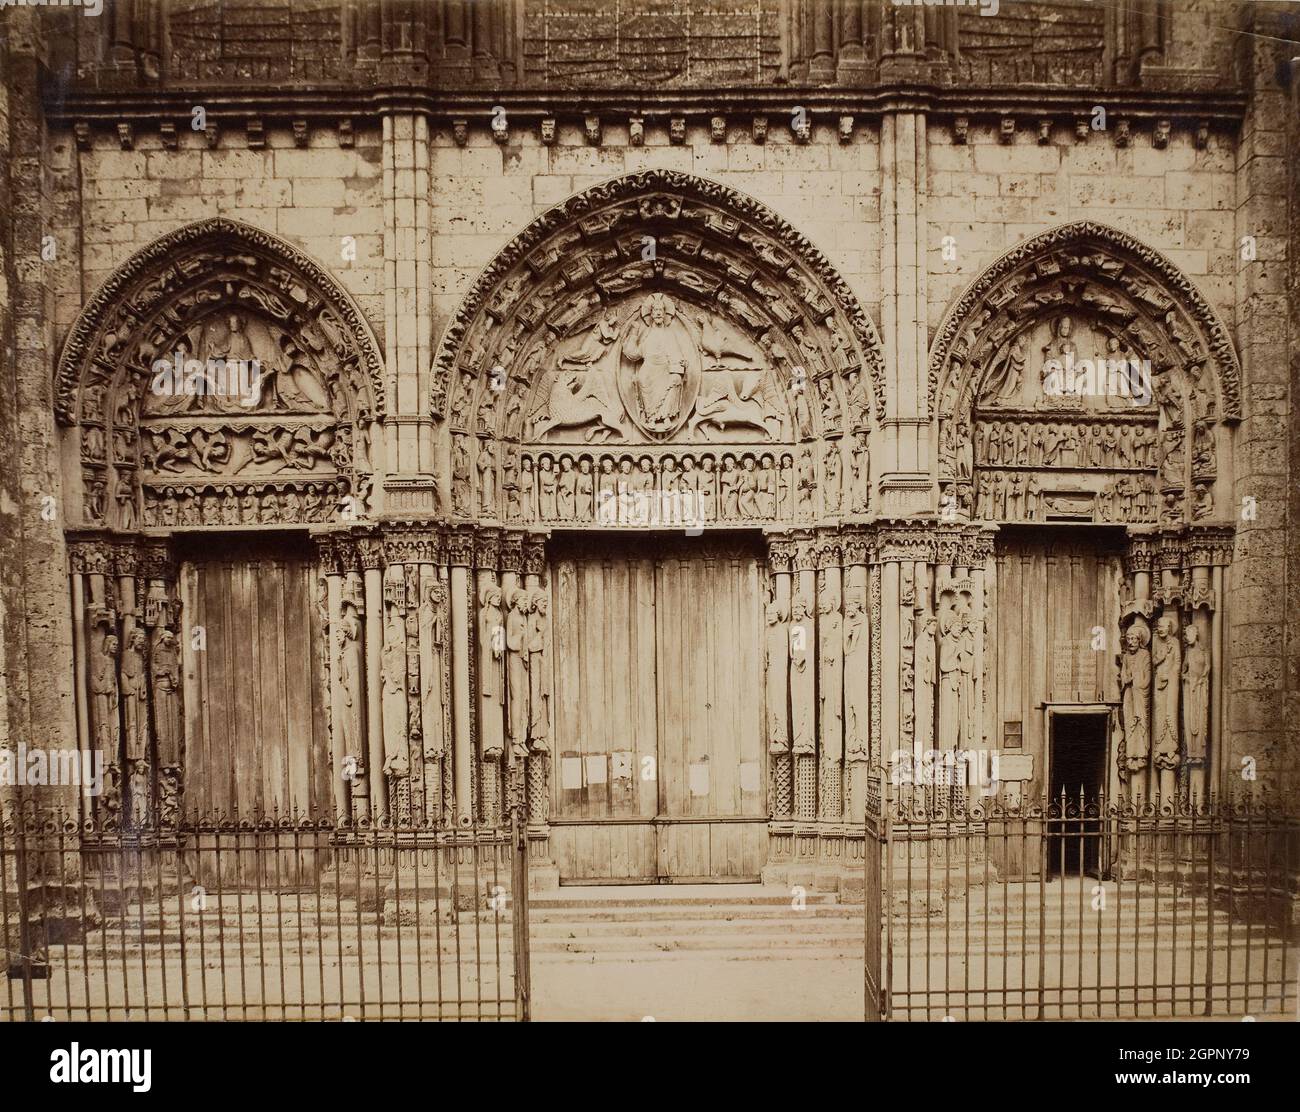 List 94+ Images the royal portal of chartres was carved in which style Sharp